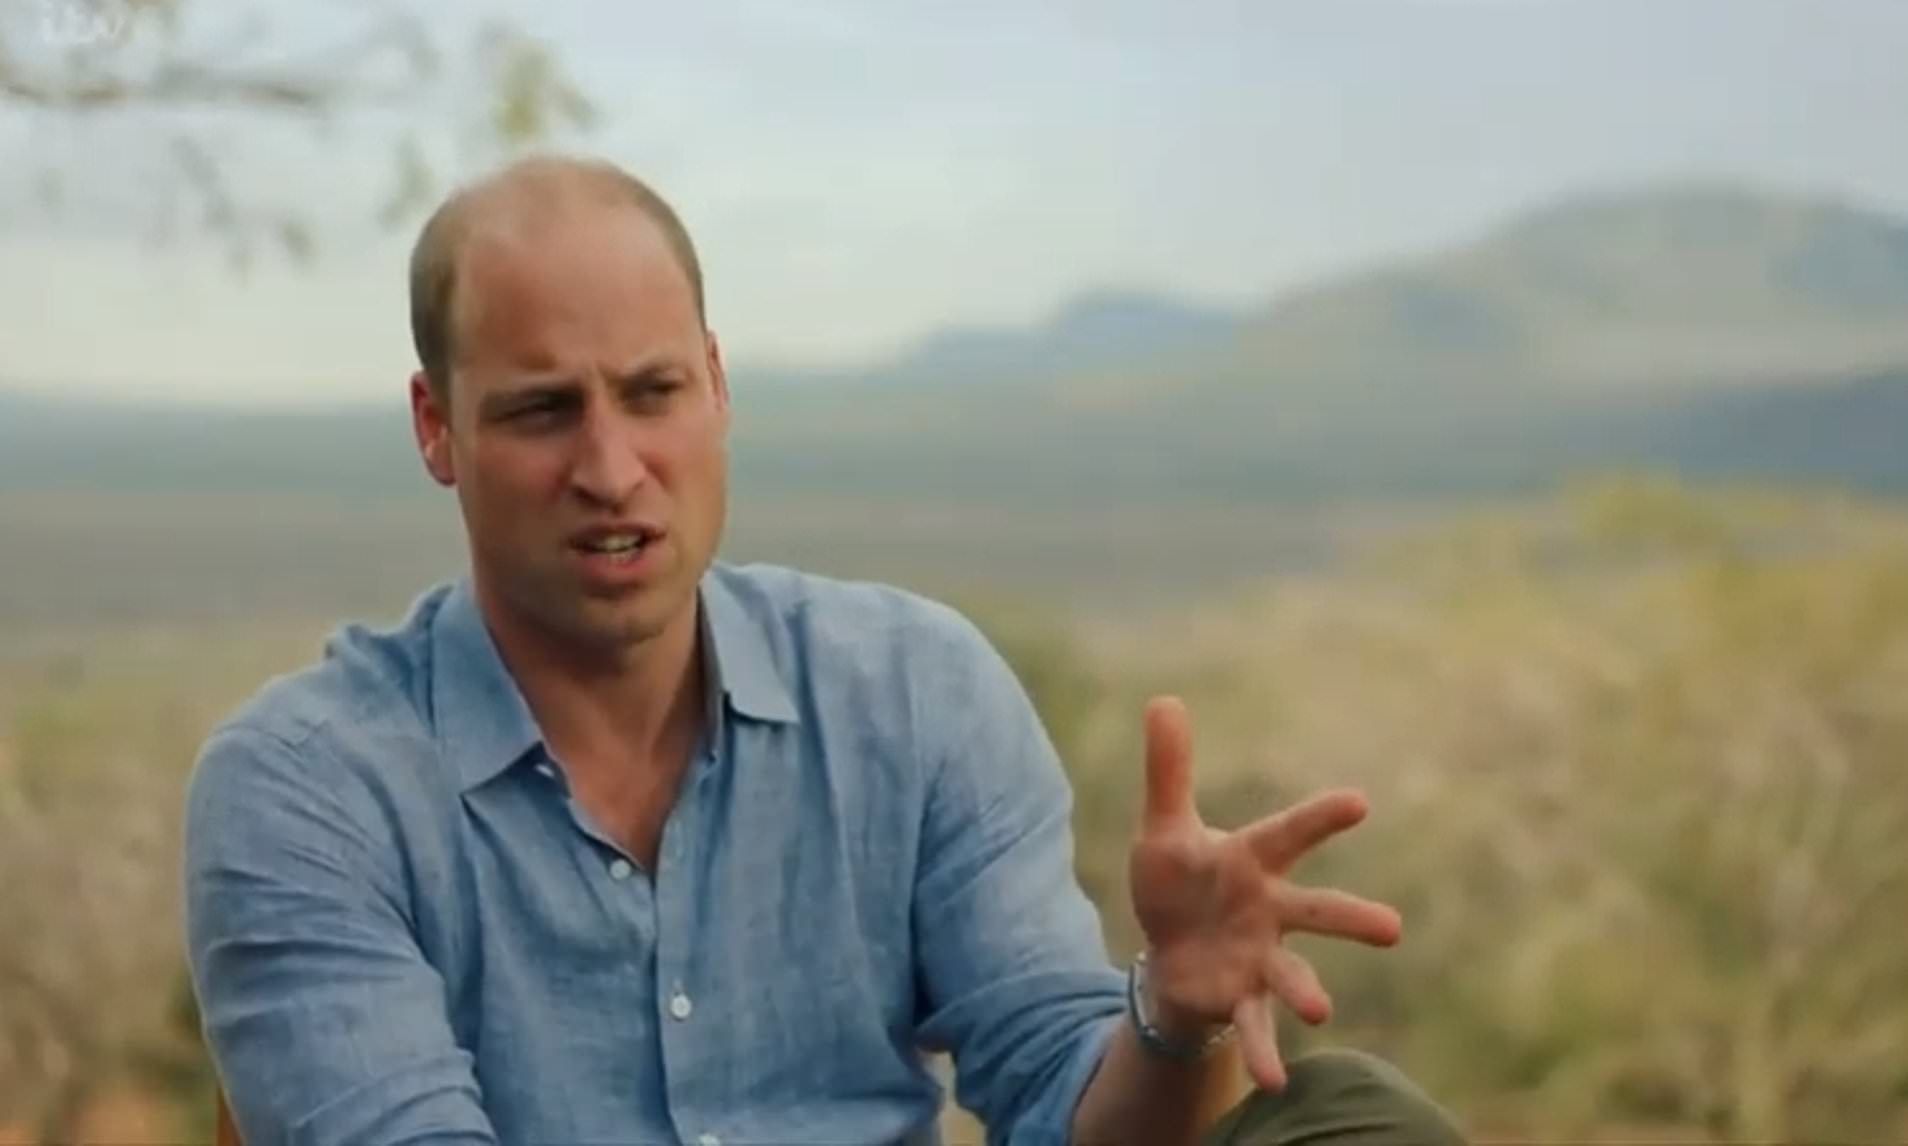 Prince William: A Planet For Us All - Duke of Cambridge - Oxford Films